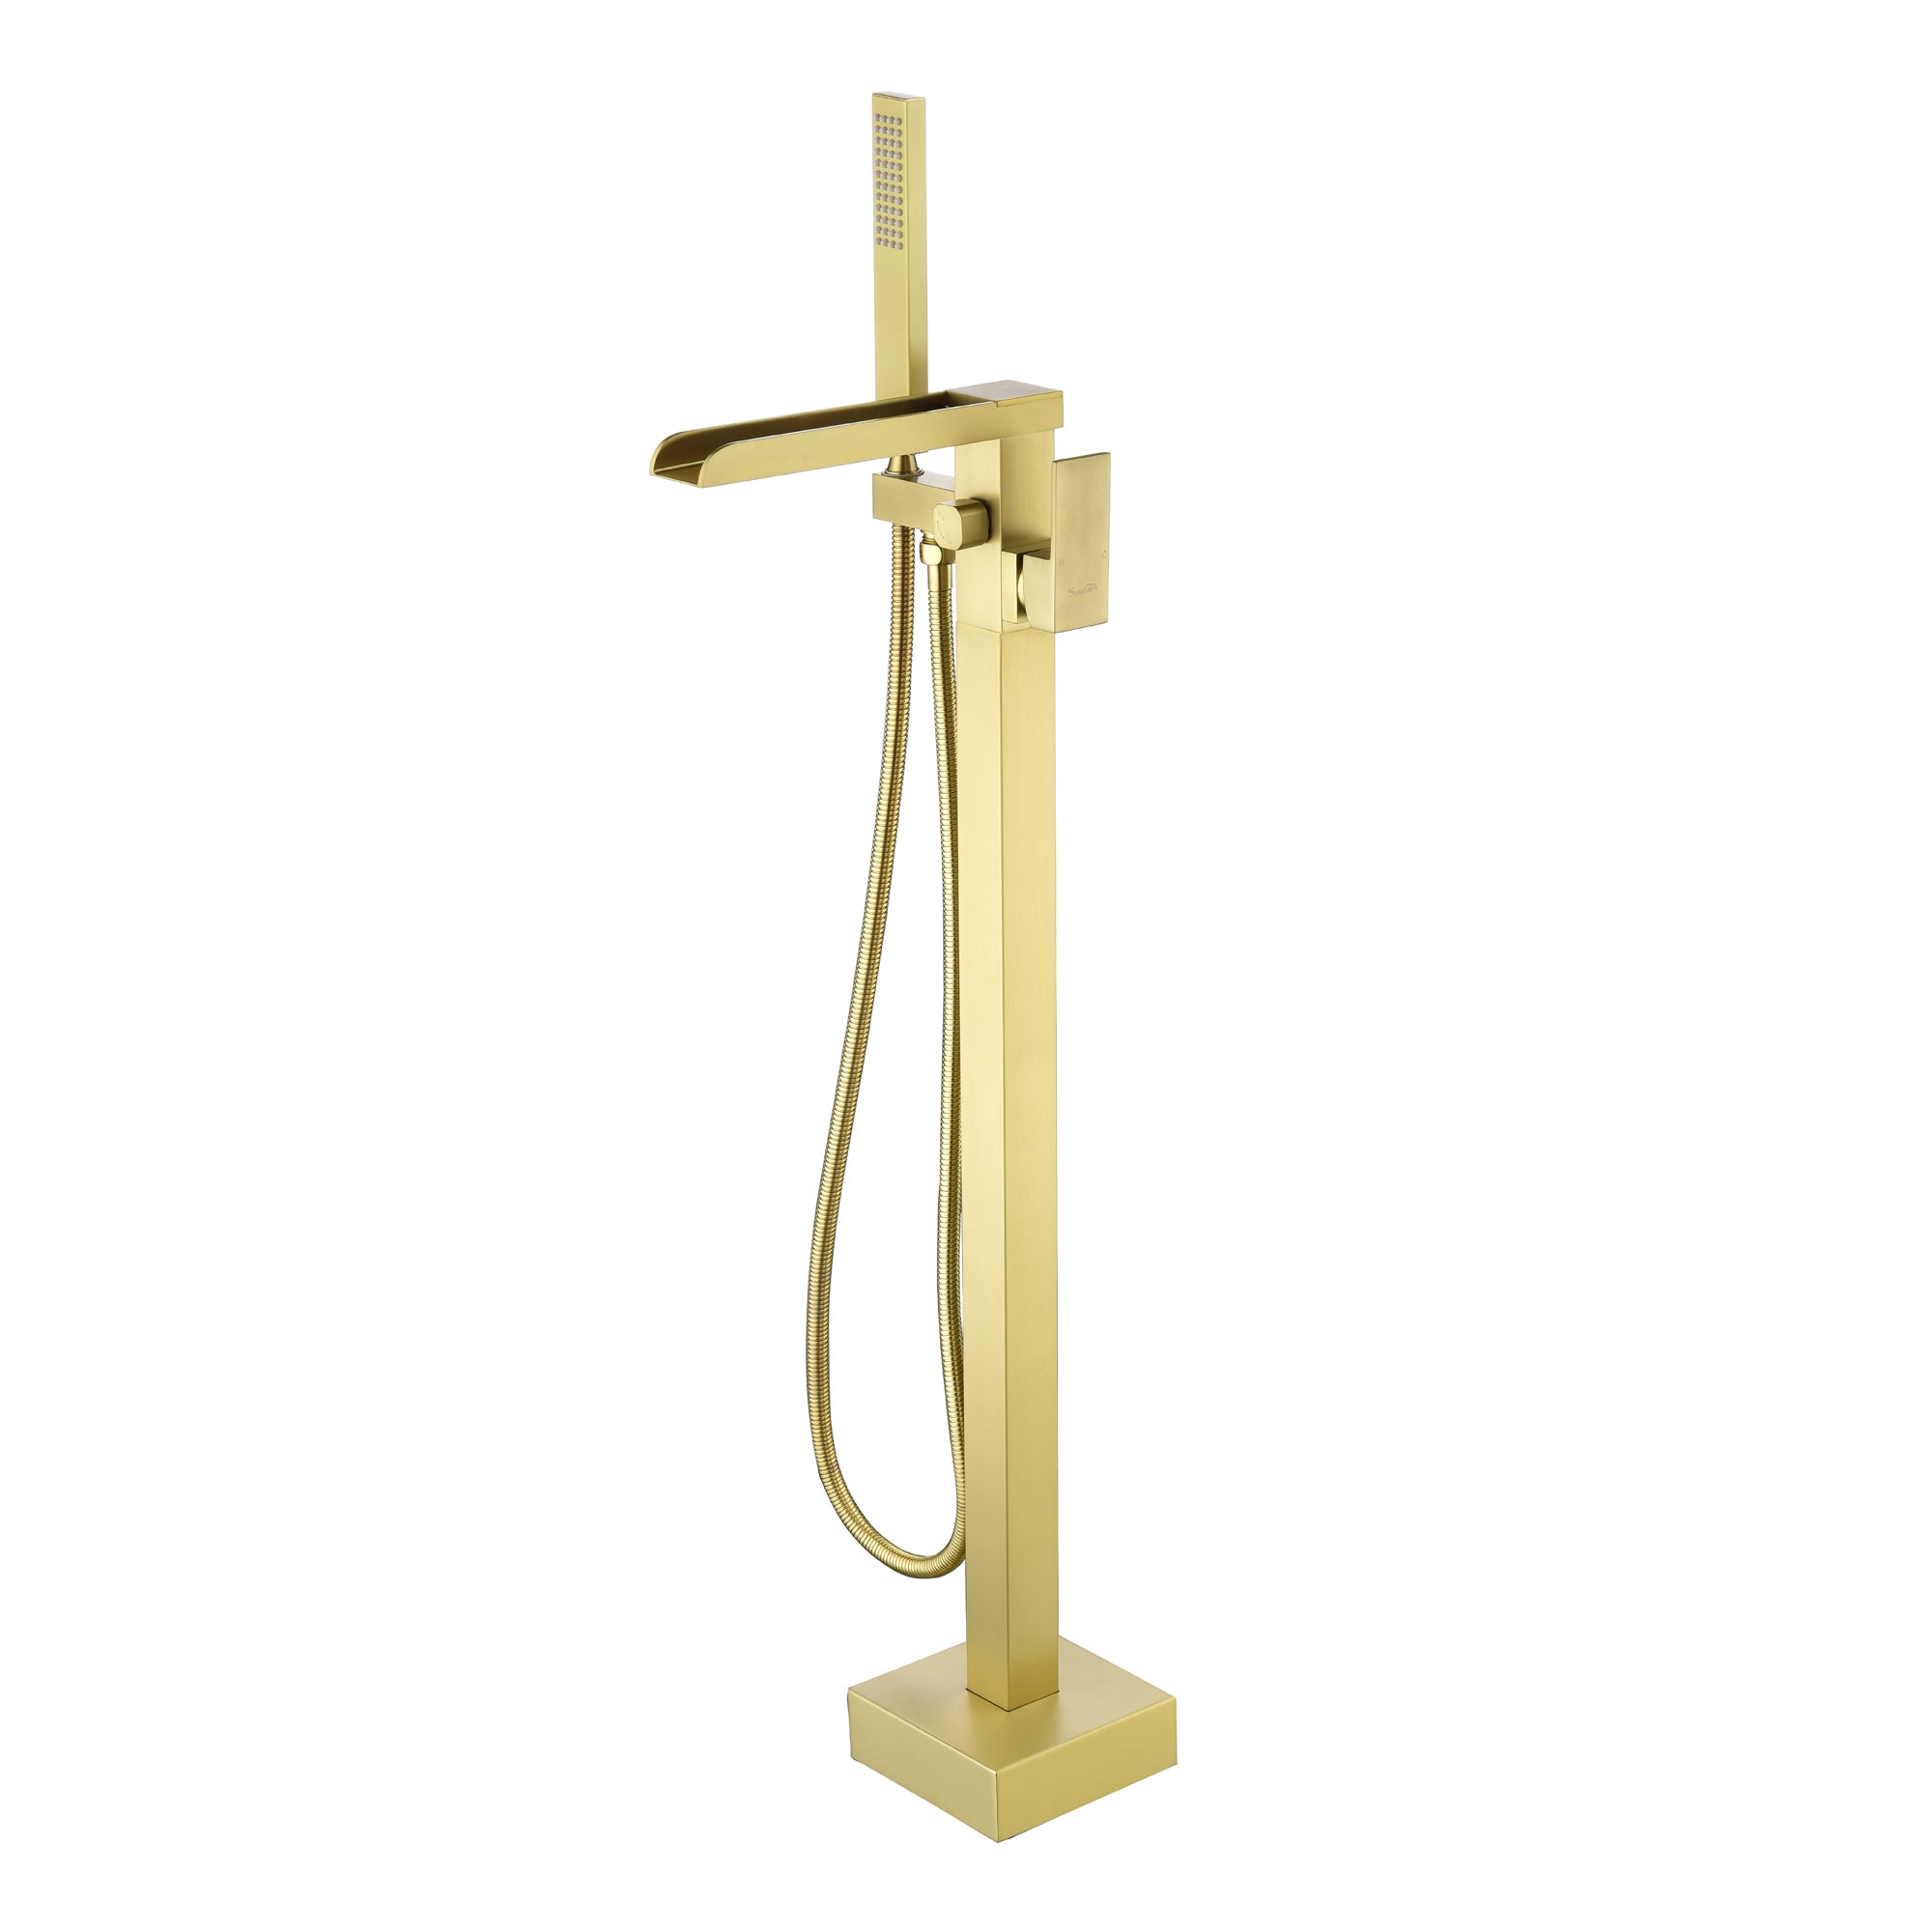 Boyel Living Freestanding Floor Mount Single Handle Waterfall Tub Filler Faucet with Handheld Shower in Brushed Gold